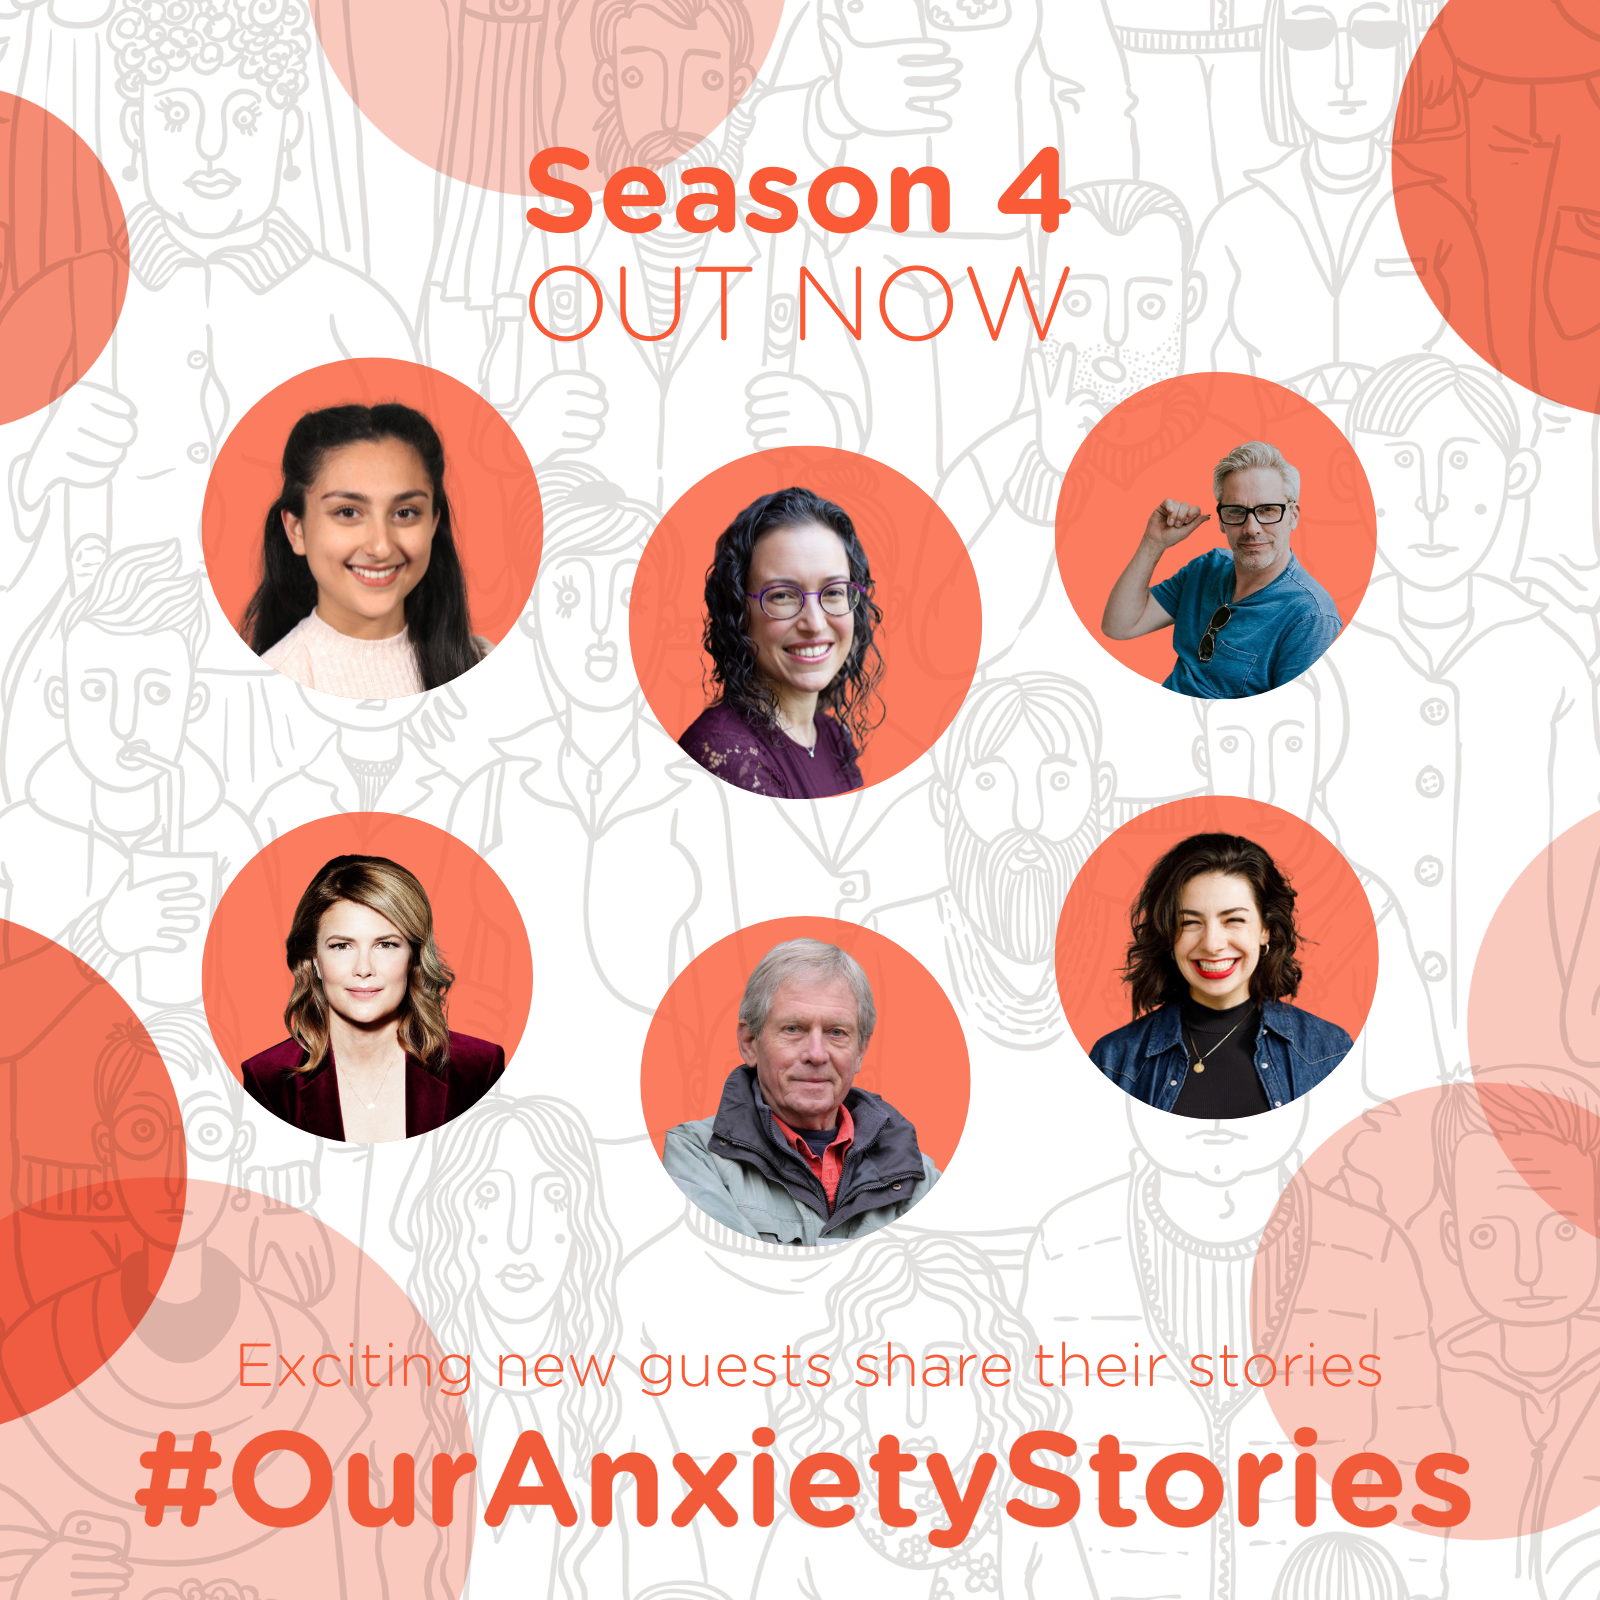 Rows of faces revealed as guests for the Anxiety Canada Podcast. Pictured, row 1: Anxiety Canada Youth Network alum, Pegah; Registered Psychologist, Dr. Marlene Taube-Schiff; Writer, comedian, and comedian, writer, and #OurAnxietyStories podcast host, John Bateman. Pictured, row 2: Speaker, activist, mother, and cancer survivor, Tamara Taggart; Renowned artist Robert Bateman; and mental health advocate & writer, Chloë Grande. 